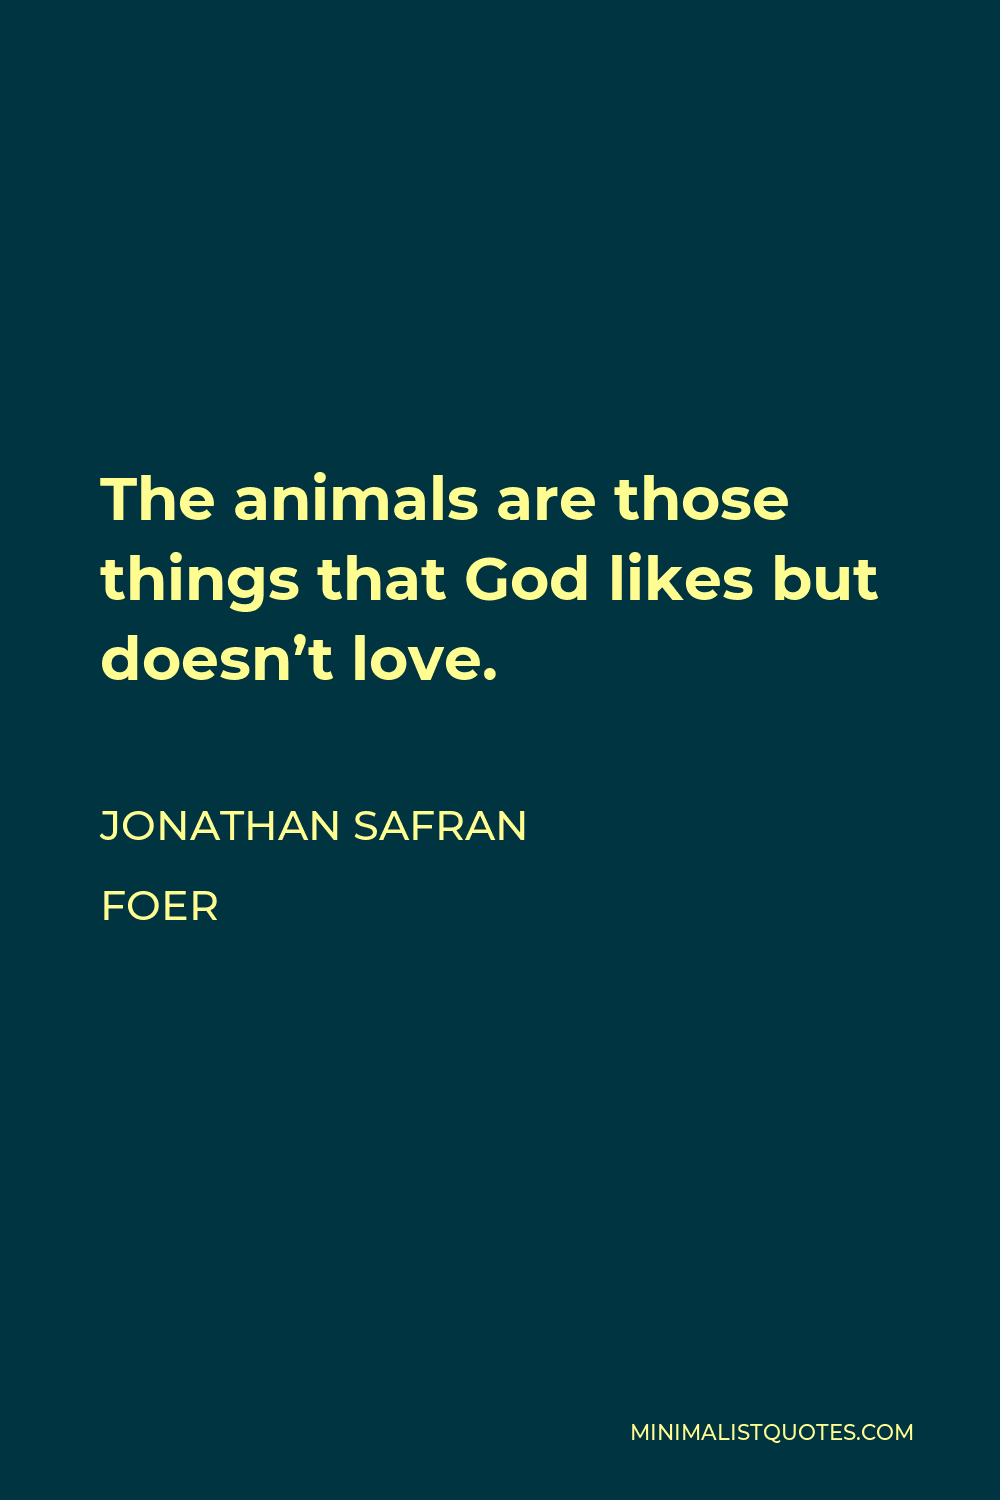 Jonathan Safran Foer Quote - The animals are those things that God likes but doesn’t love.